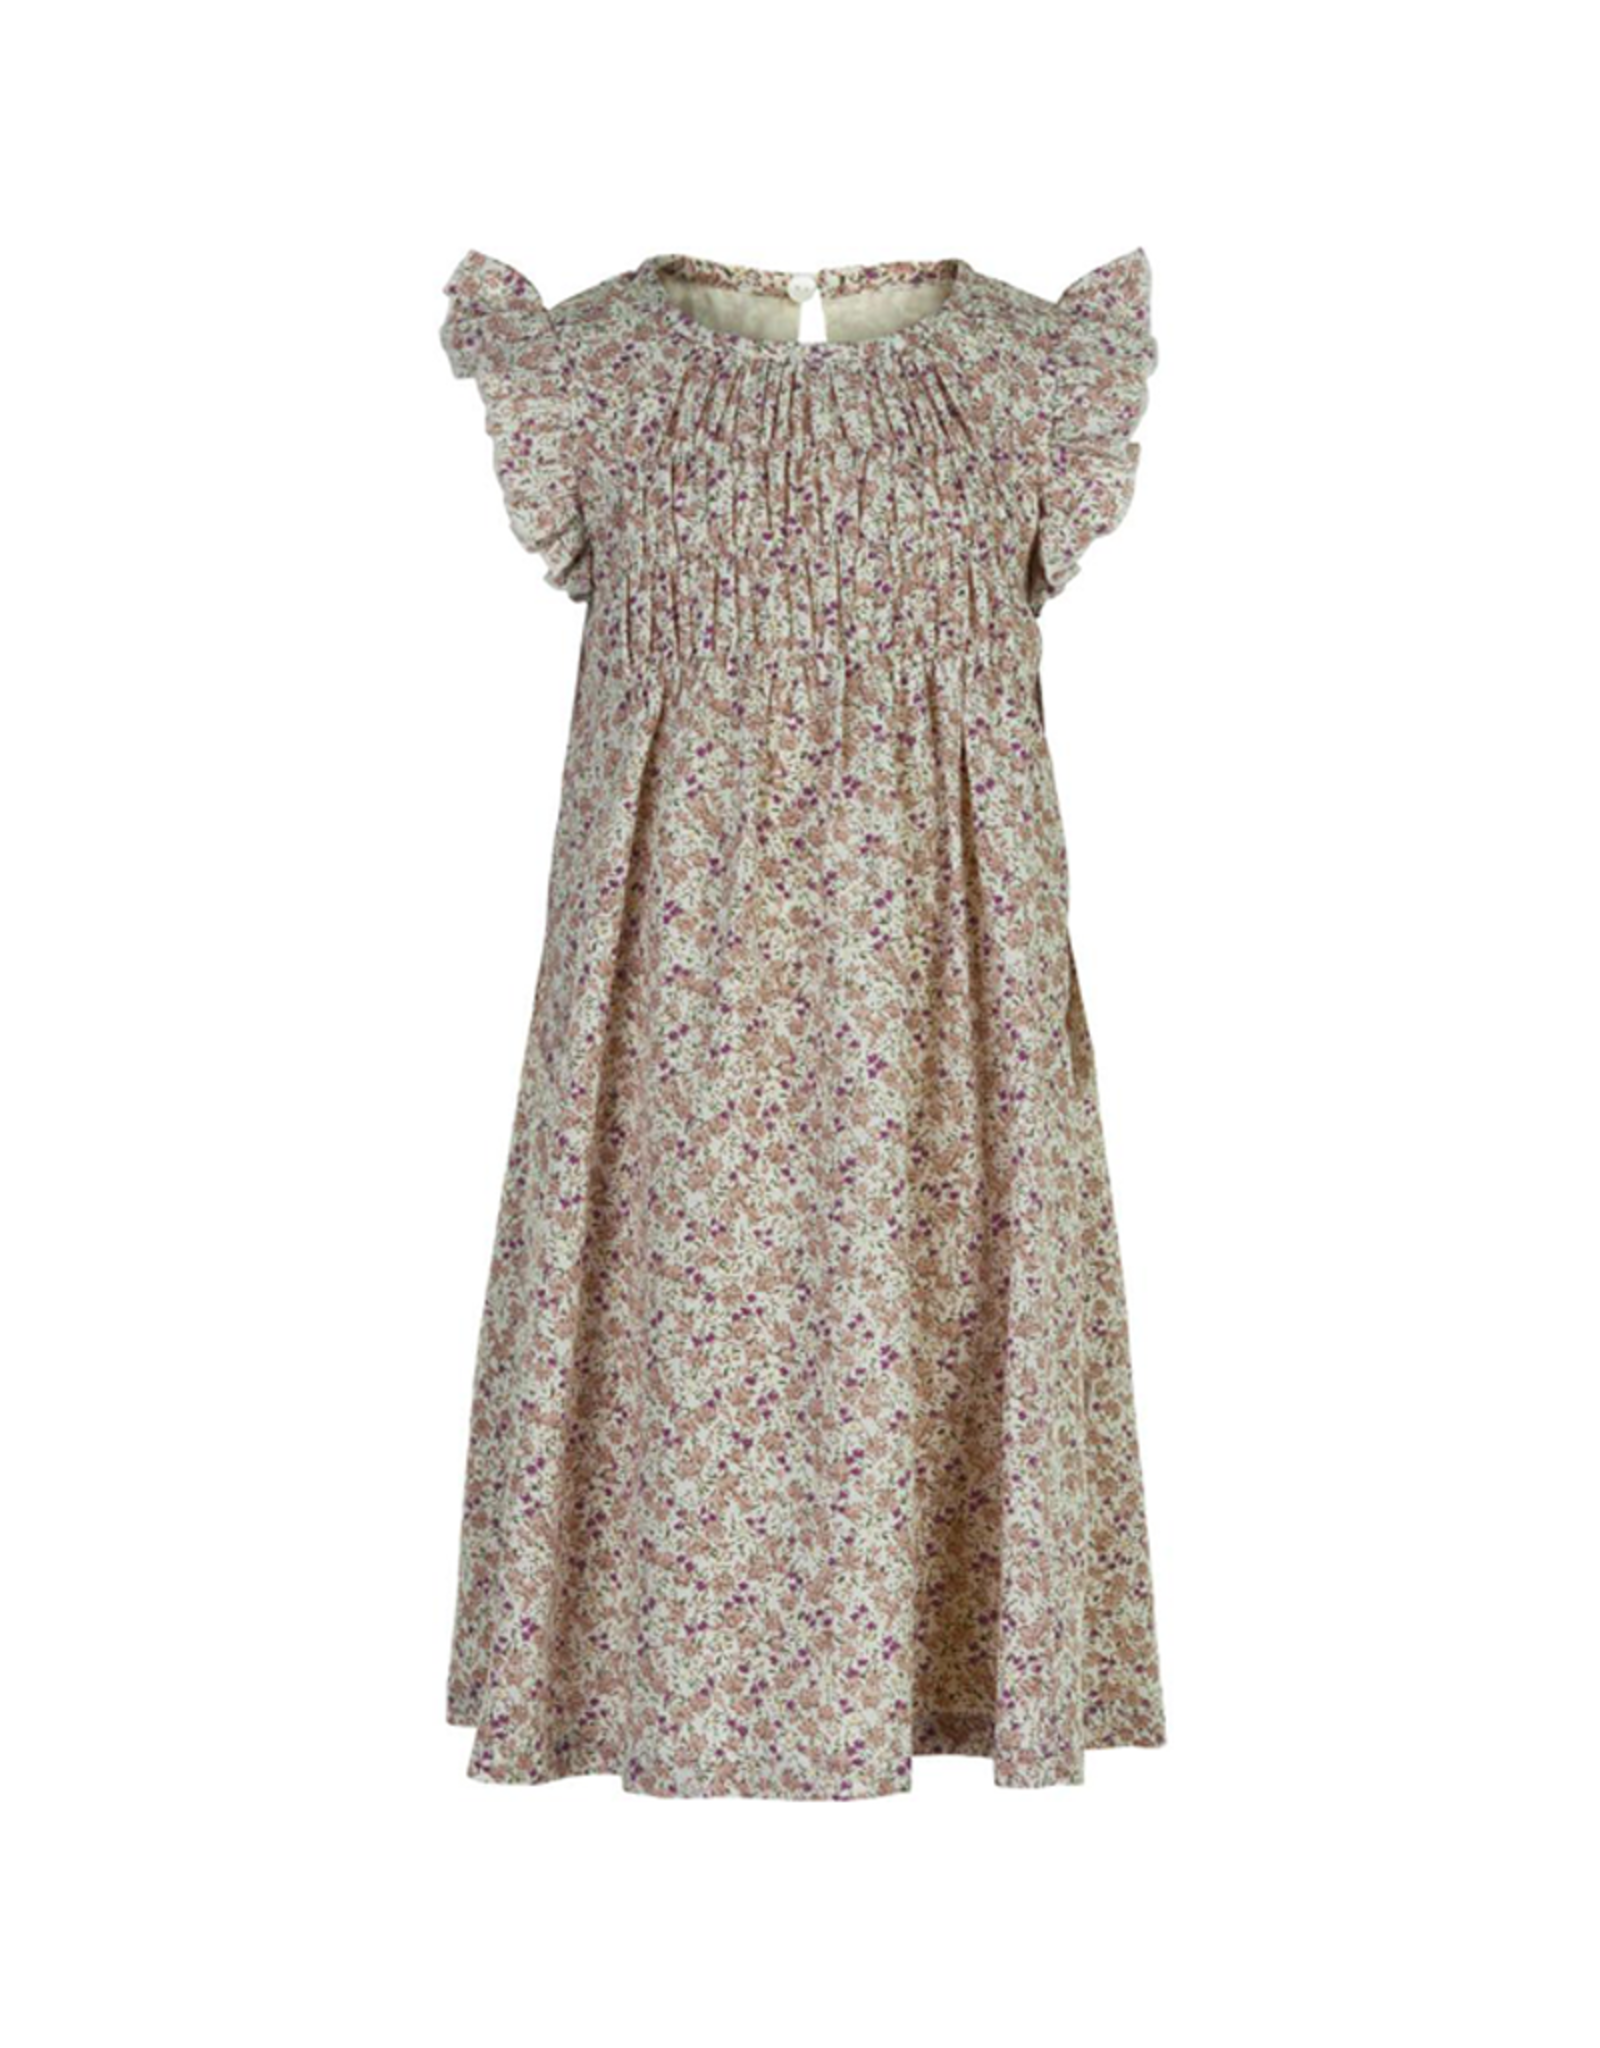 Aktuator i aften shilling Creamie Purple/Cream Floral Dress - Spoiled Sweet Boutique - Spoiled Sweet  Boutique